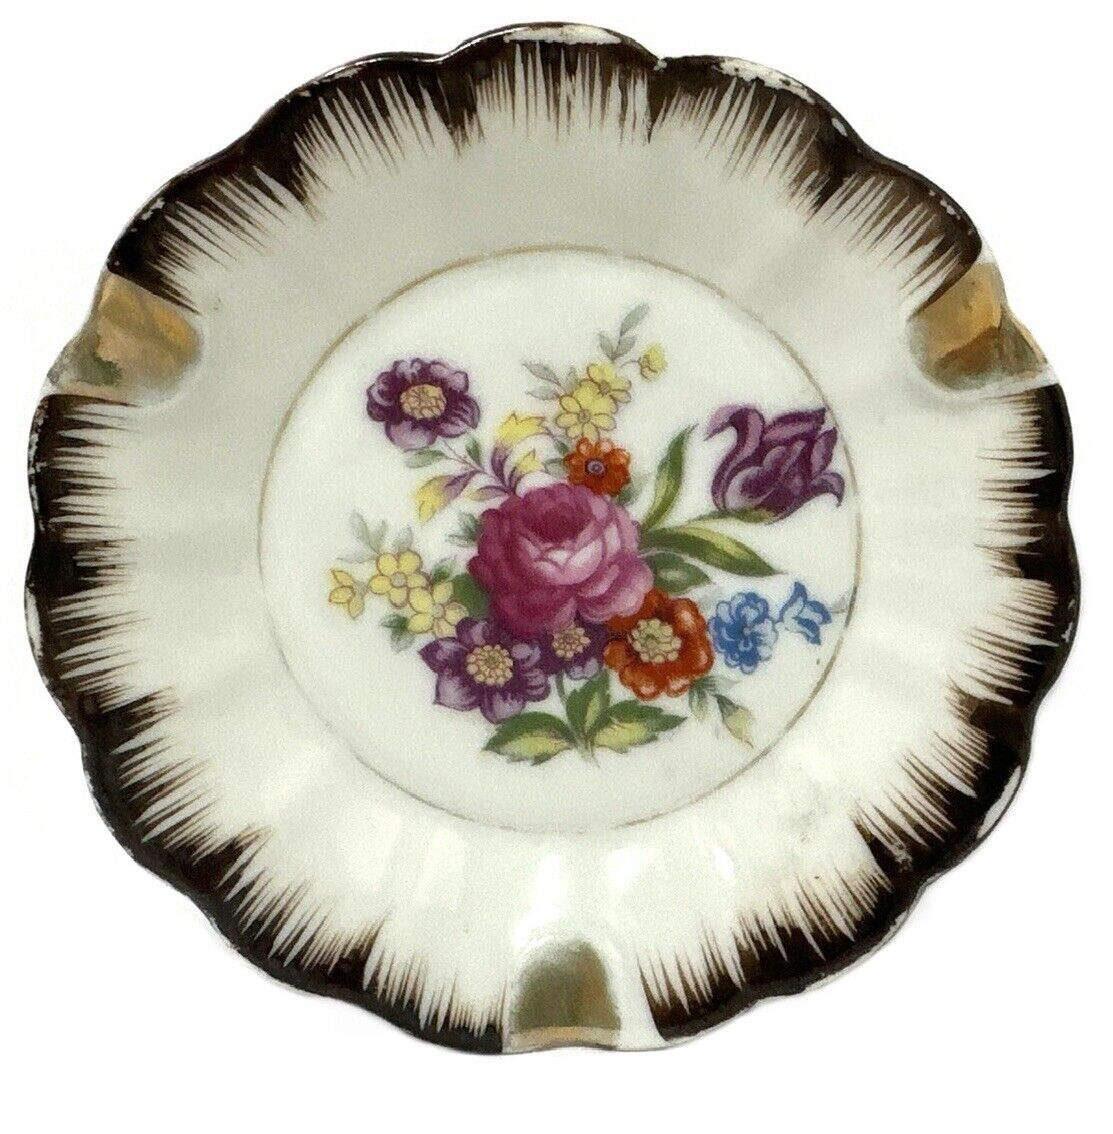 Antique Ashtray Made In Japan 1950’s Porcelain Handpainted Floral Bouquet